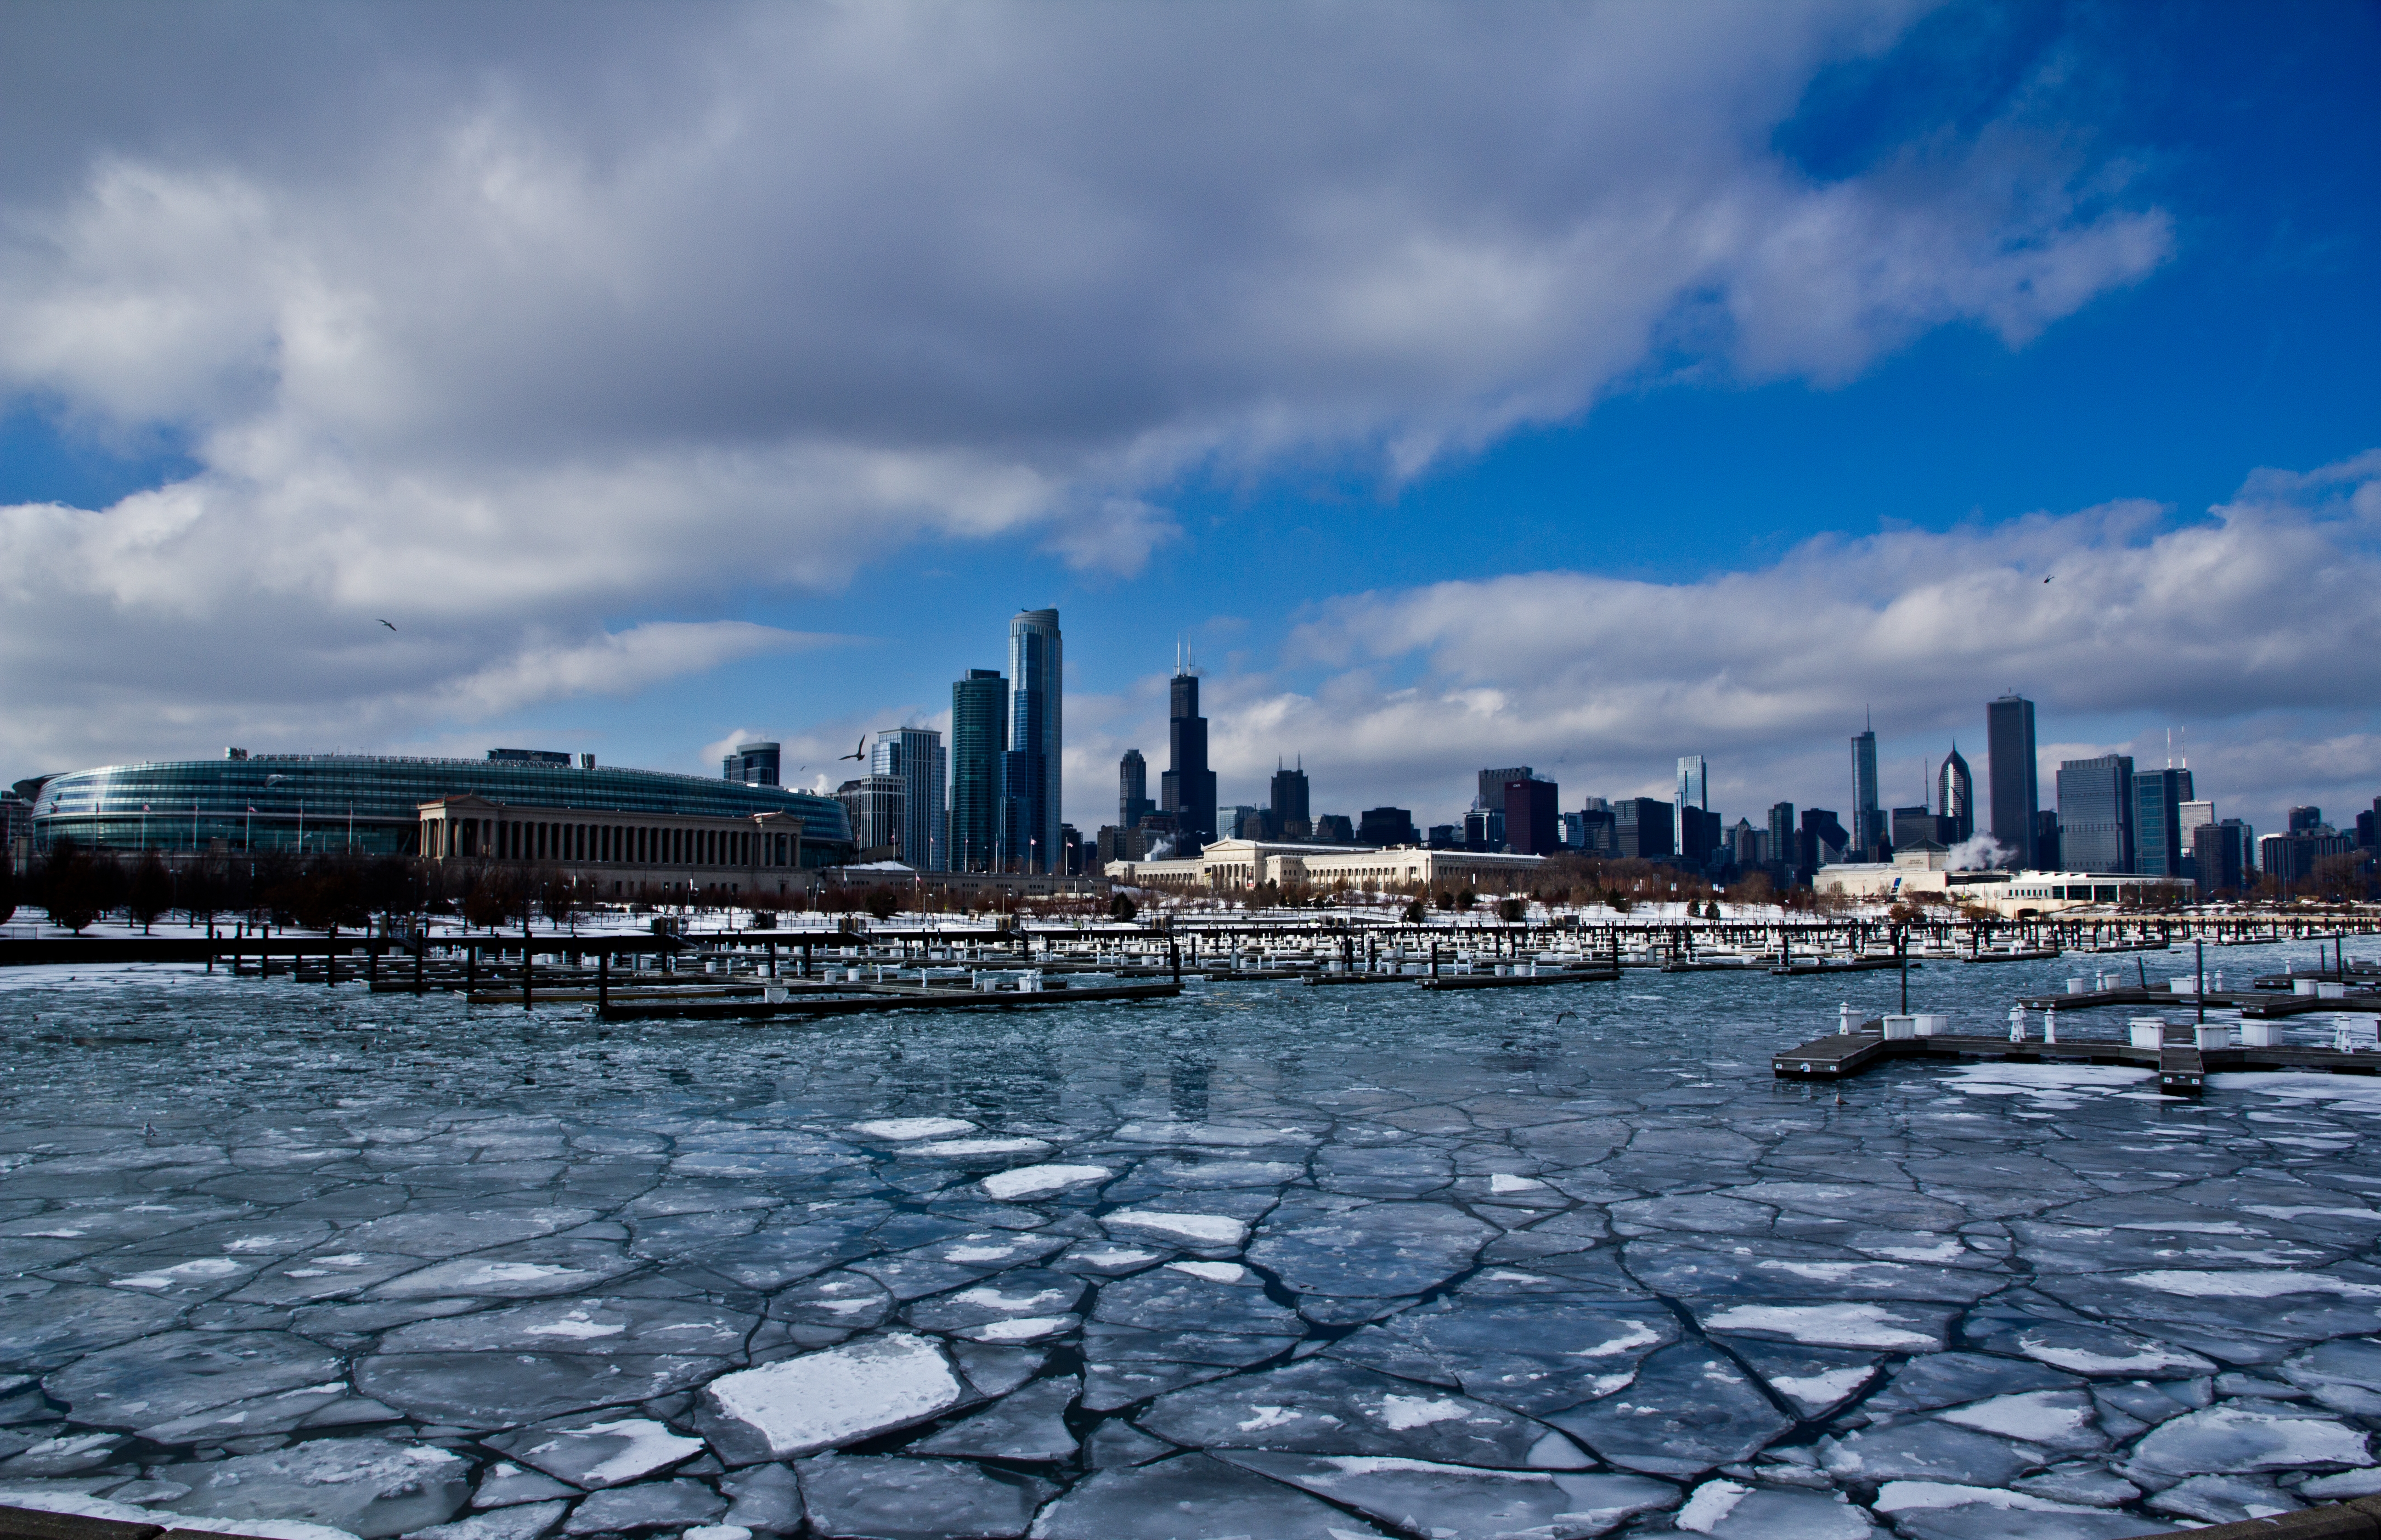 illinois, ice, zleds, winter, zdnia, america, cities, united states, building, port, skyscrapers, usa, ice floes, chicago